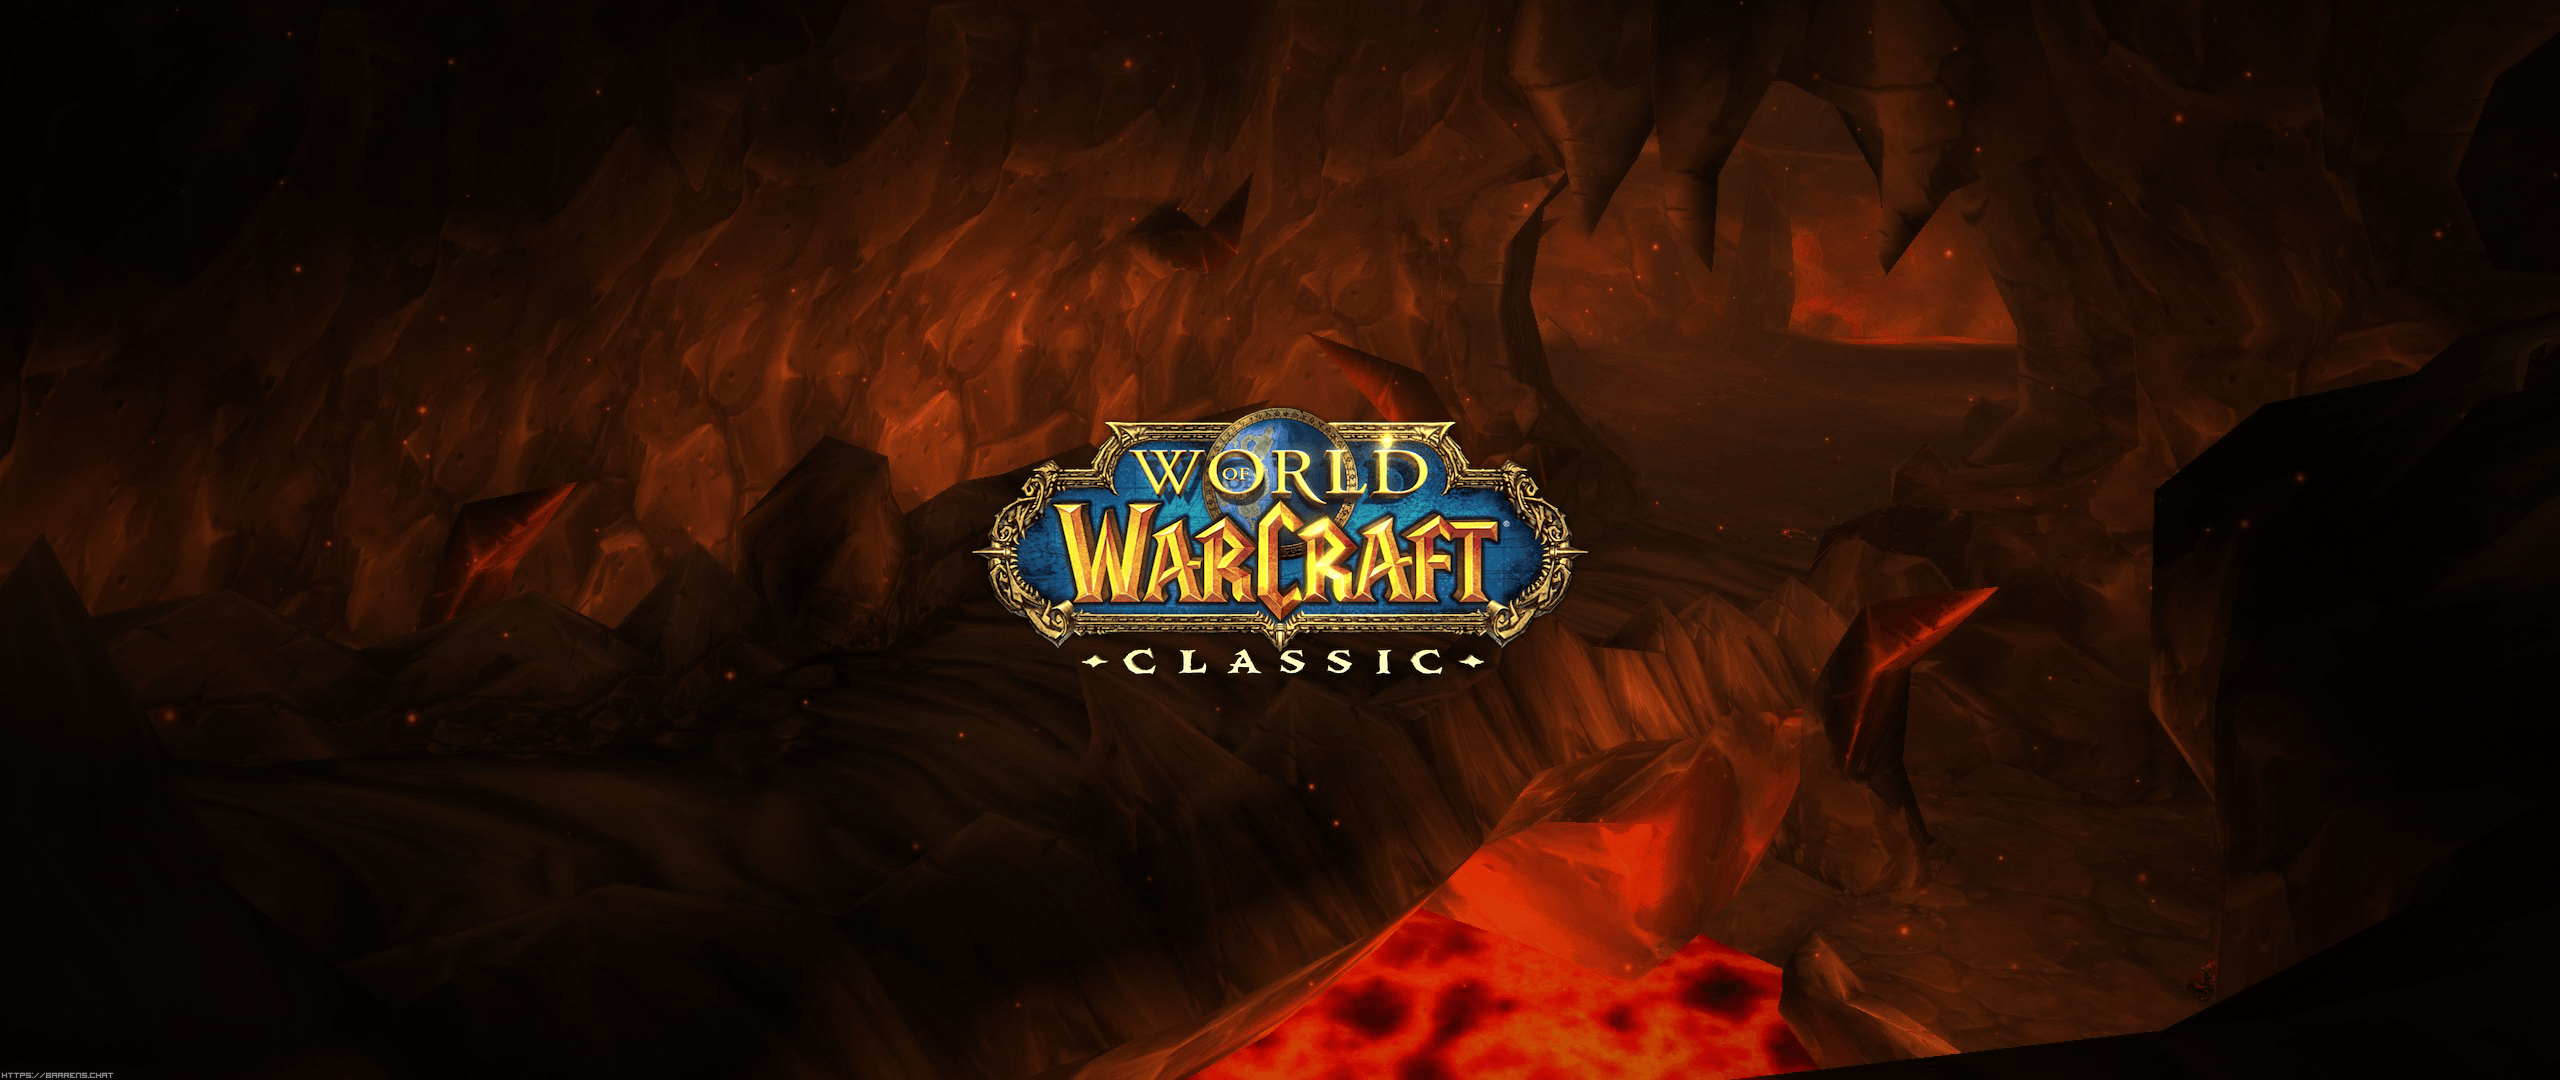 I made some ultrawide wallpapers for WoW Classic